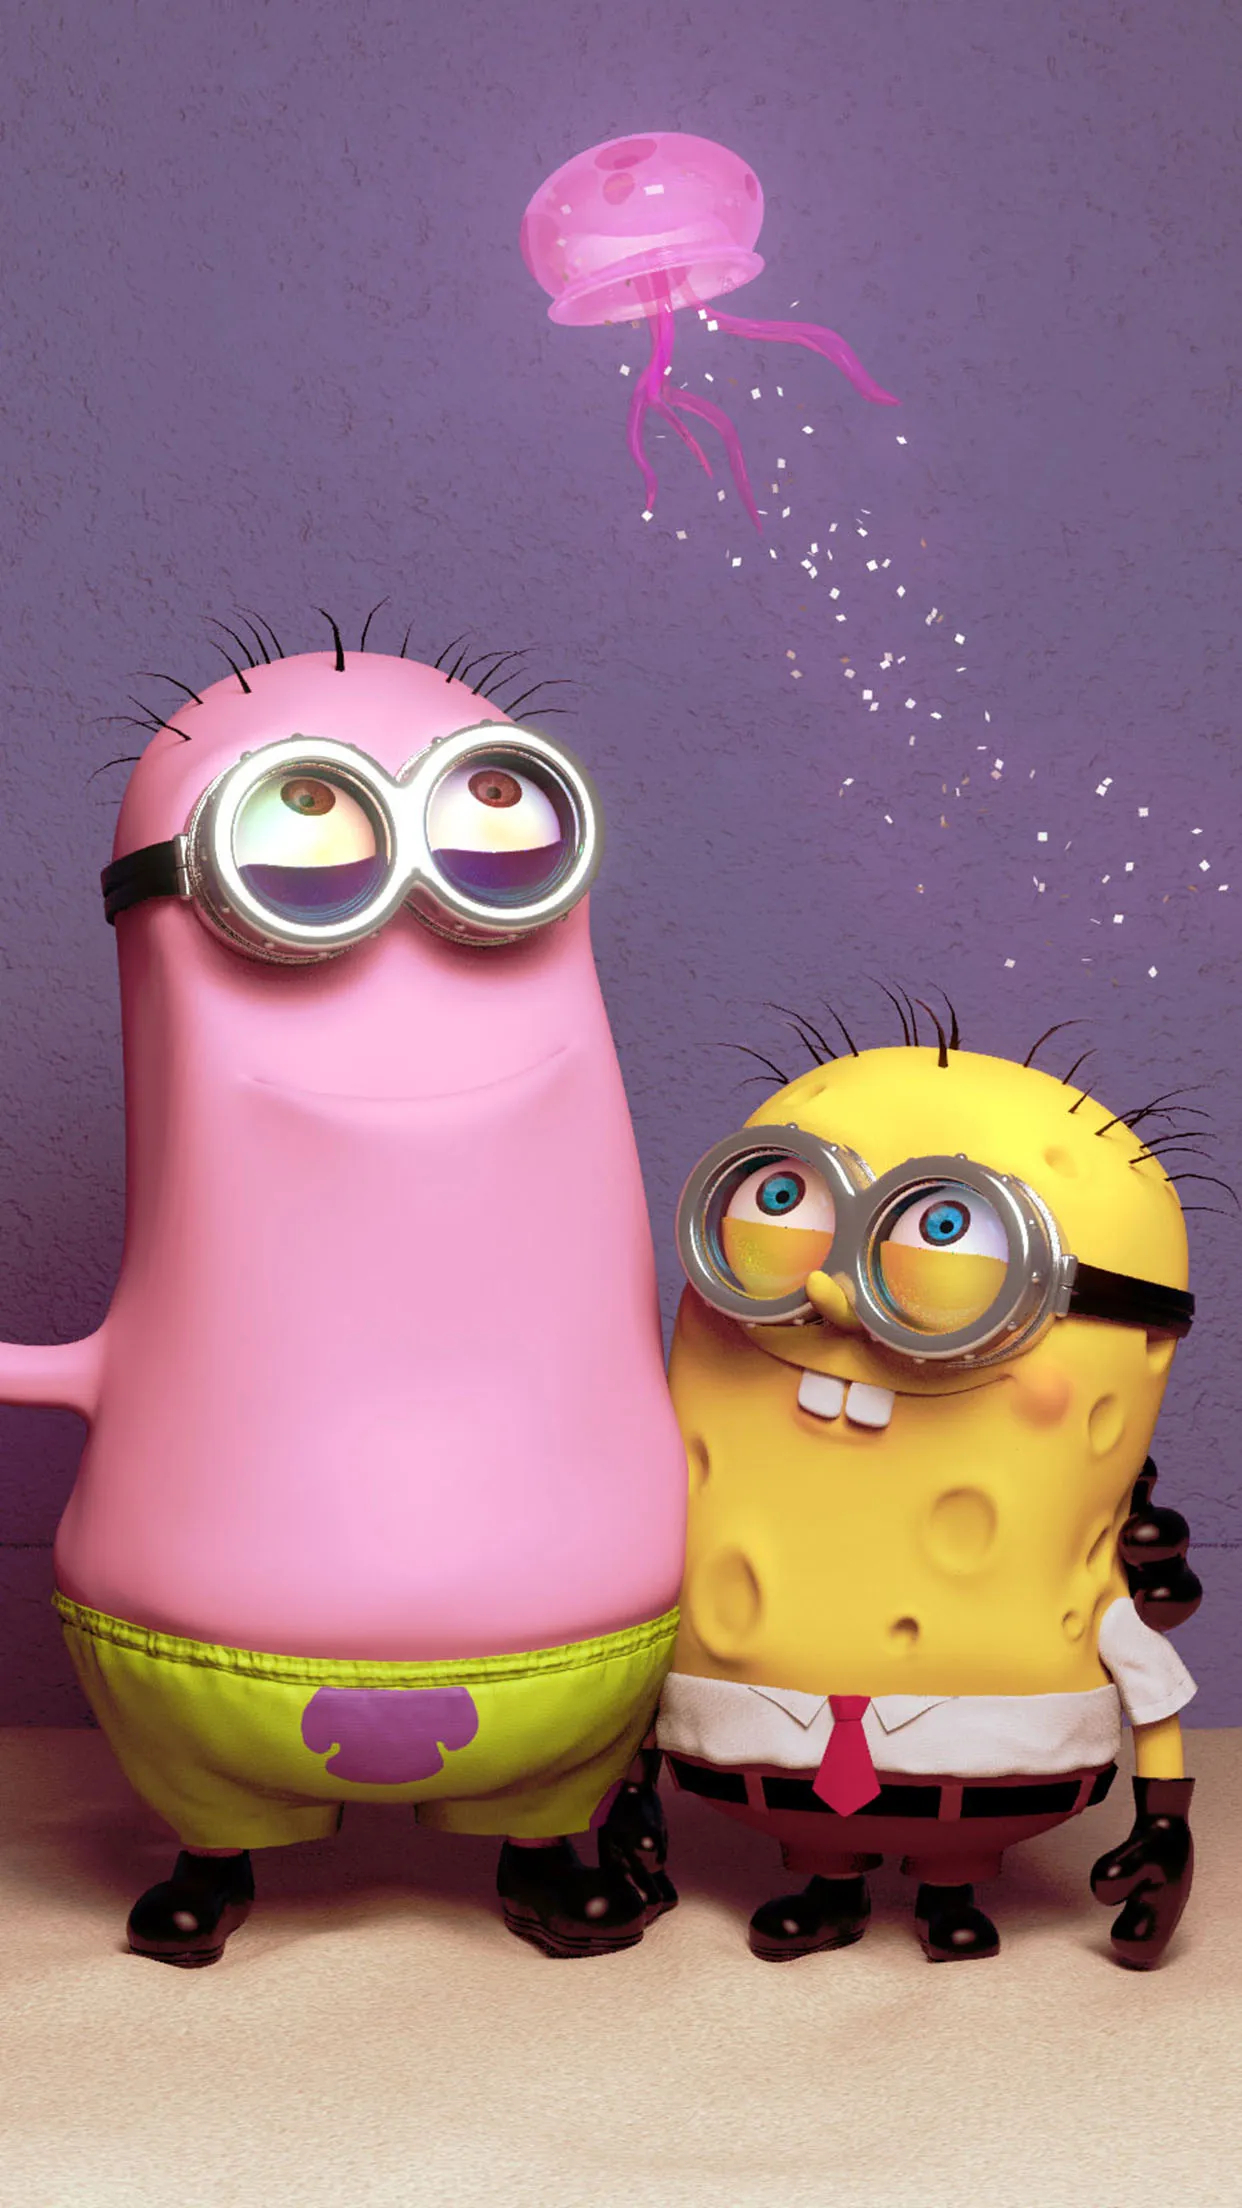 1242x2208 Despicable Me art: Sponge and Patrick Wallpaper for iPhone 11, Pro Max, X, 8, 7, 6 Free Download on 3Wallpapers